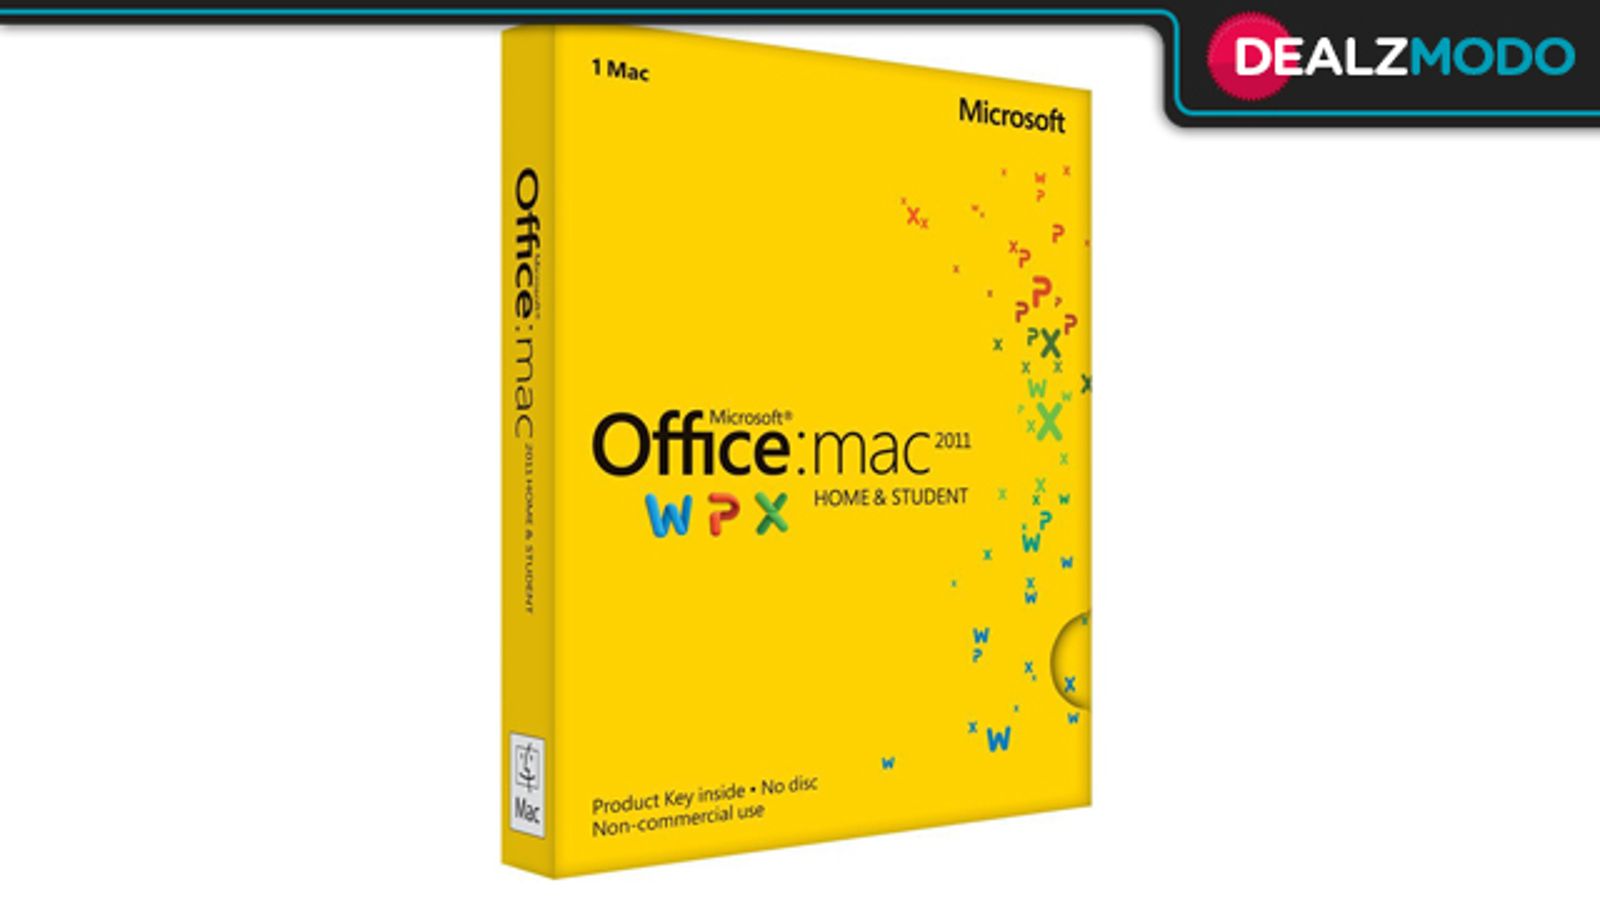 microsoft office for mac 365 cost